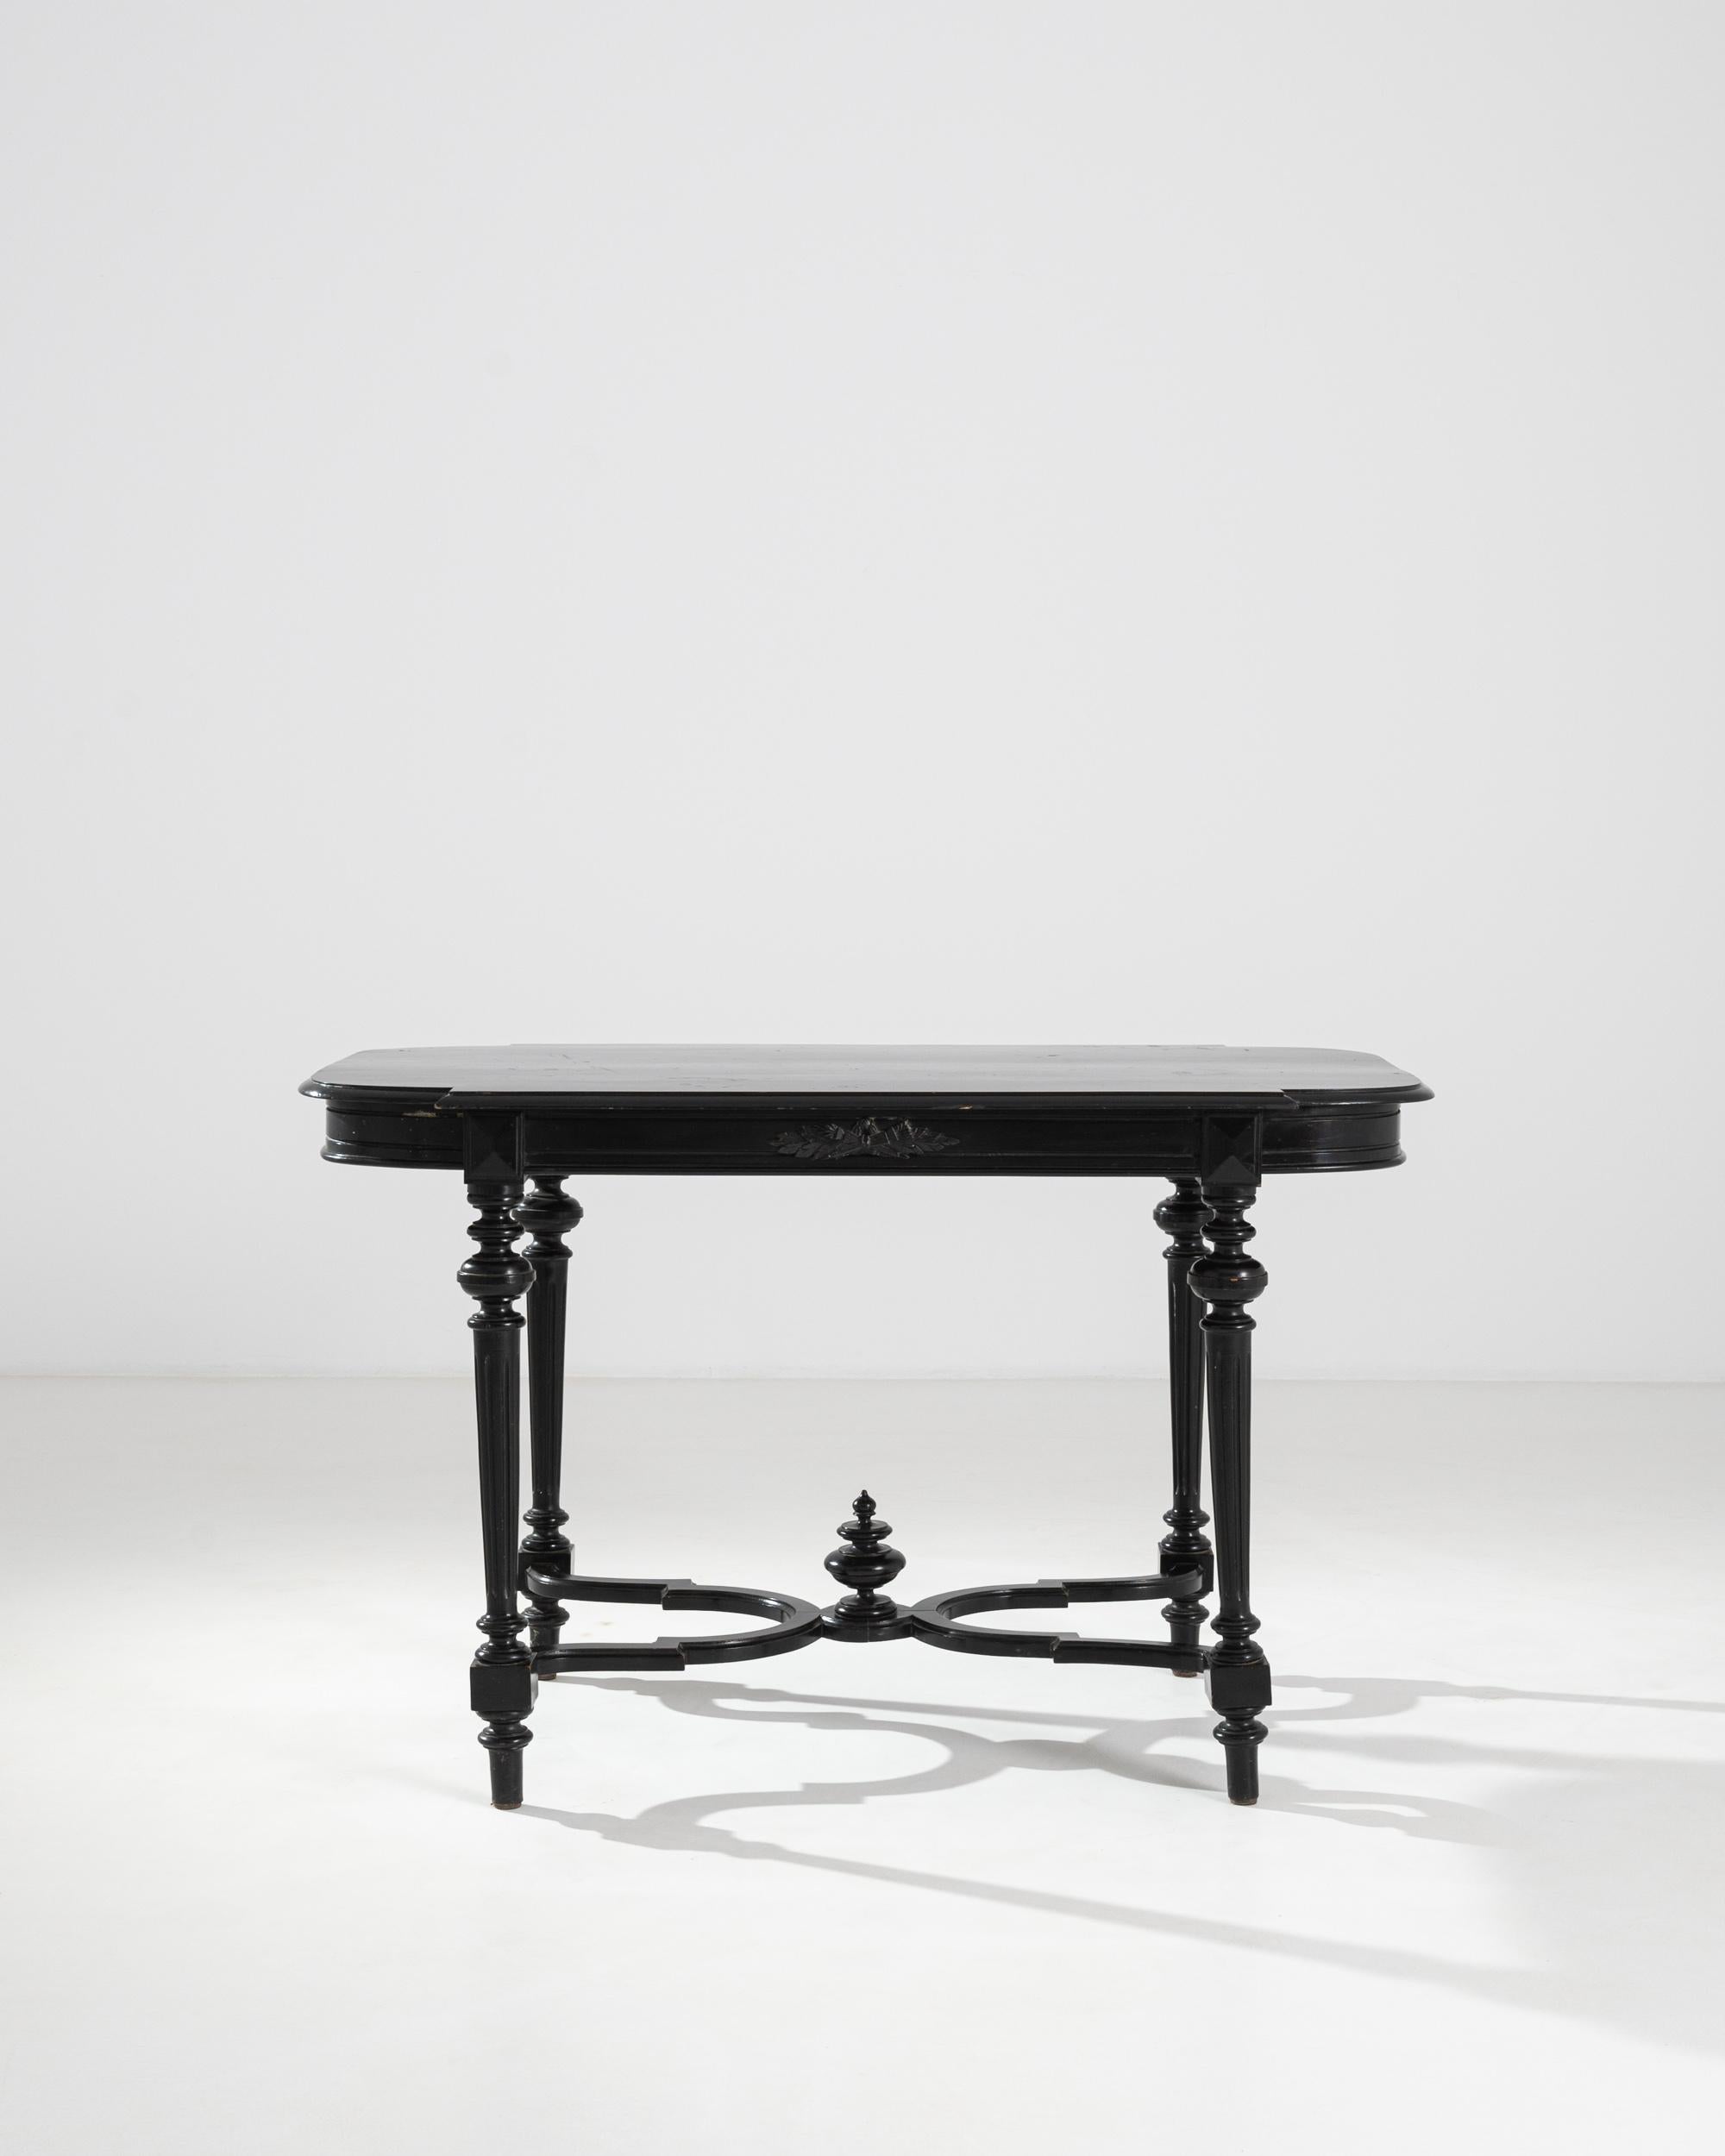 A black painted wooden table from 1860s France. Neatly lathed legs and accents, paired with a subtly patinated coat of black paint combine to create a refined side table. A leaf pattern carved into the table’s apron boasts craftsmanship and care.